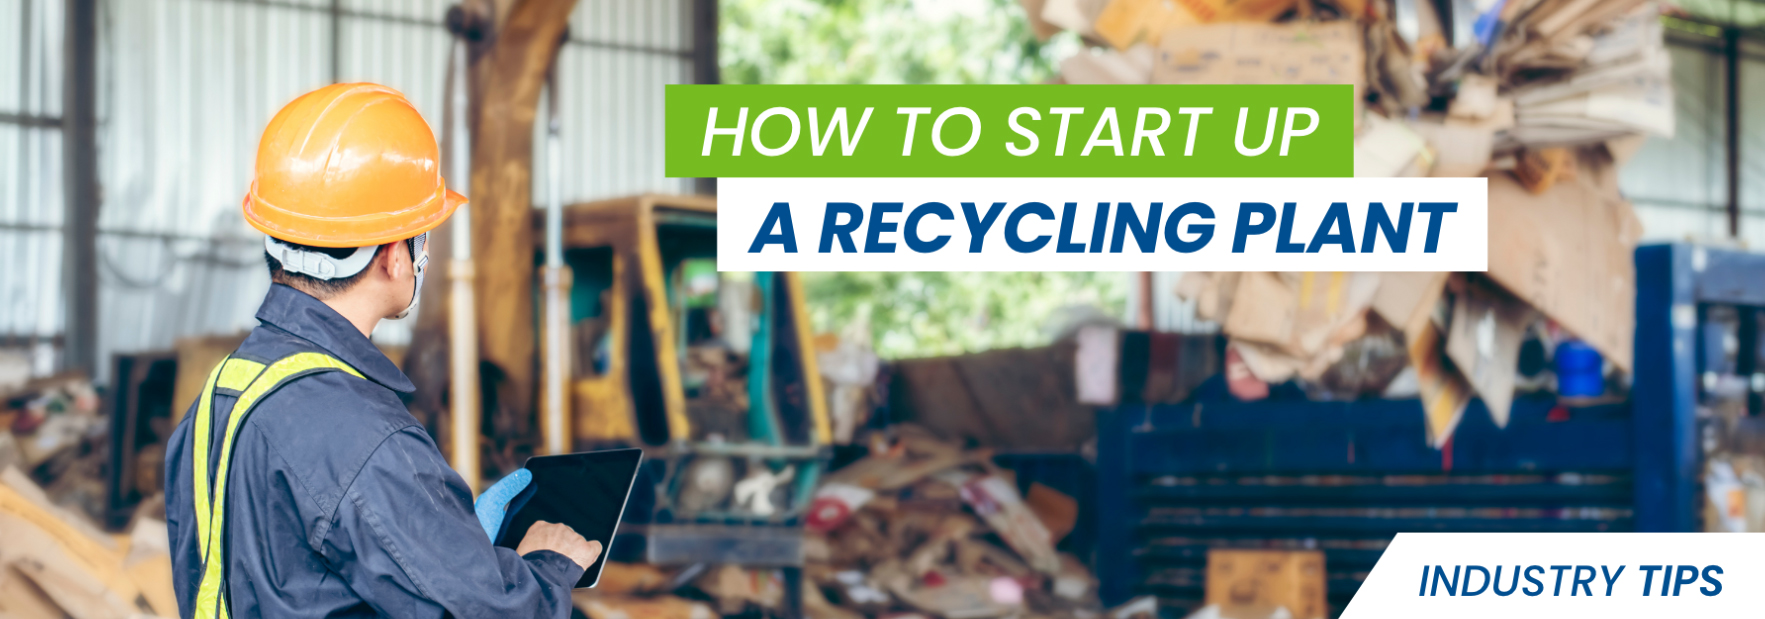 How to Start a Recycling Plant